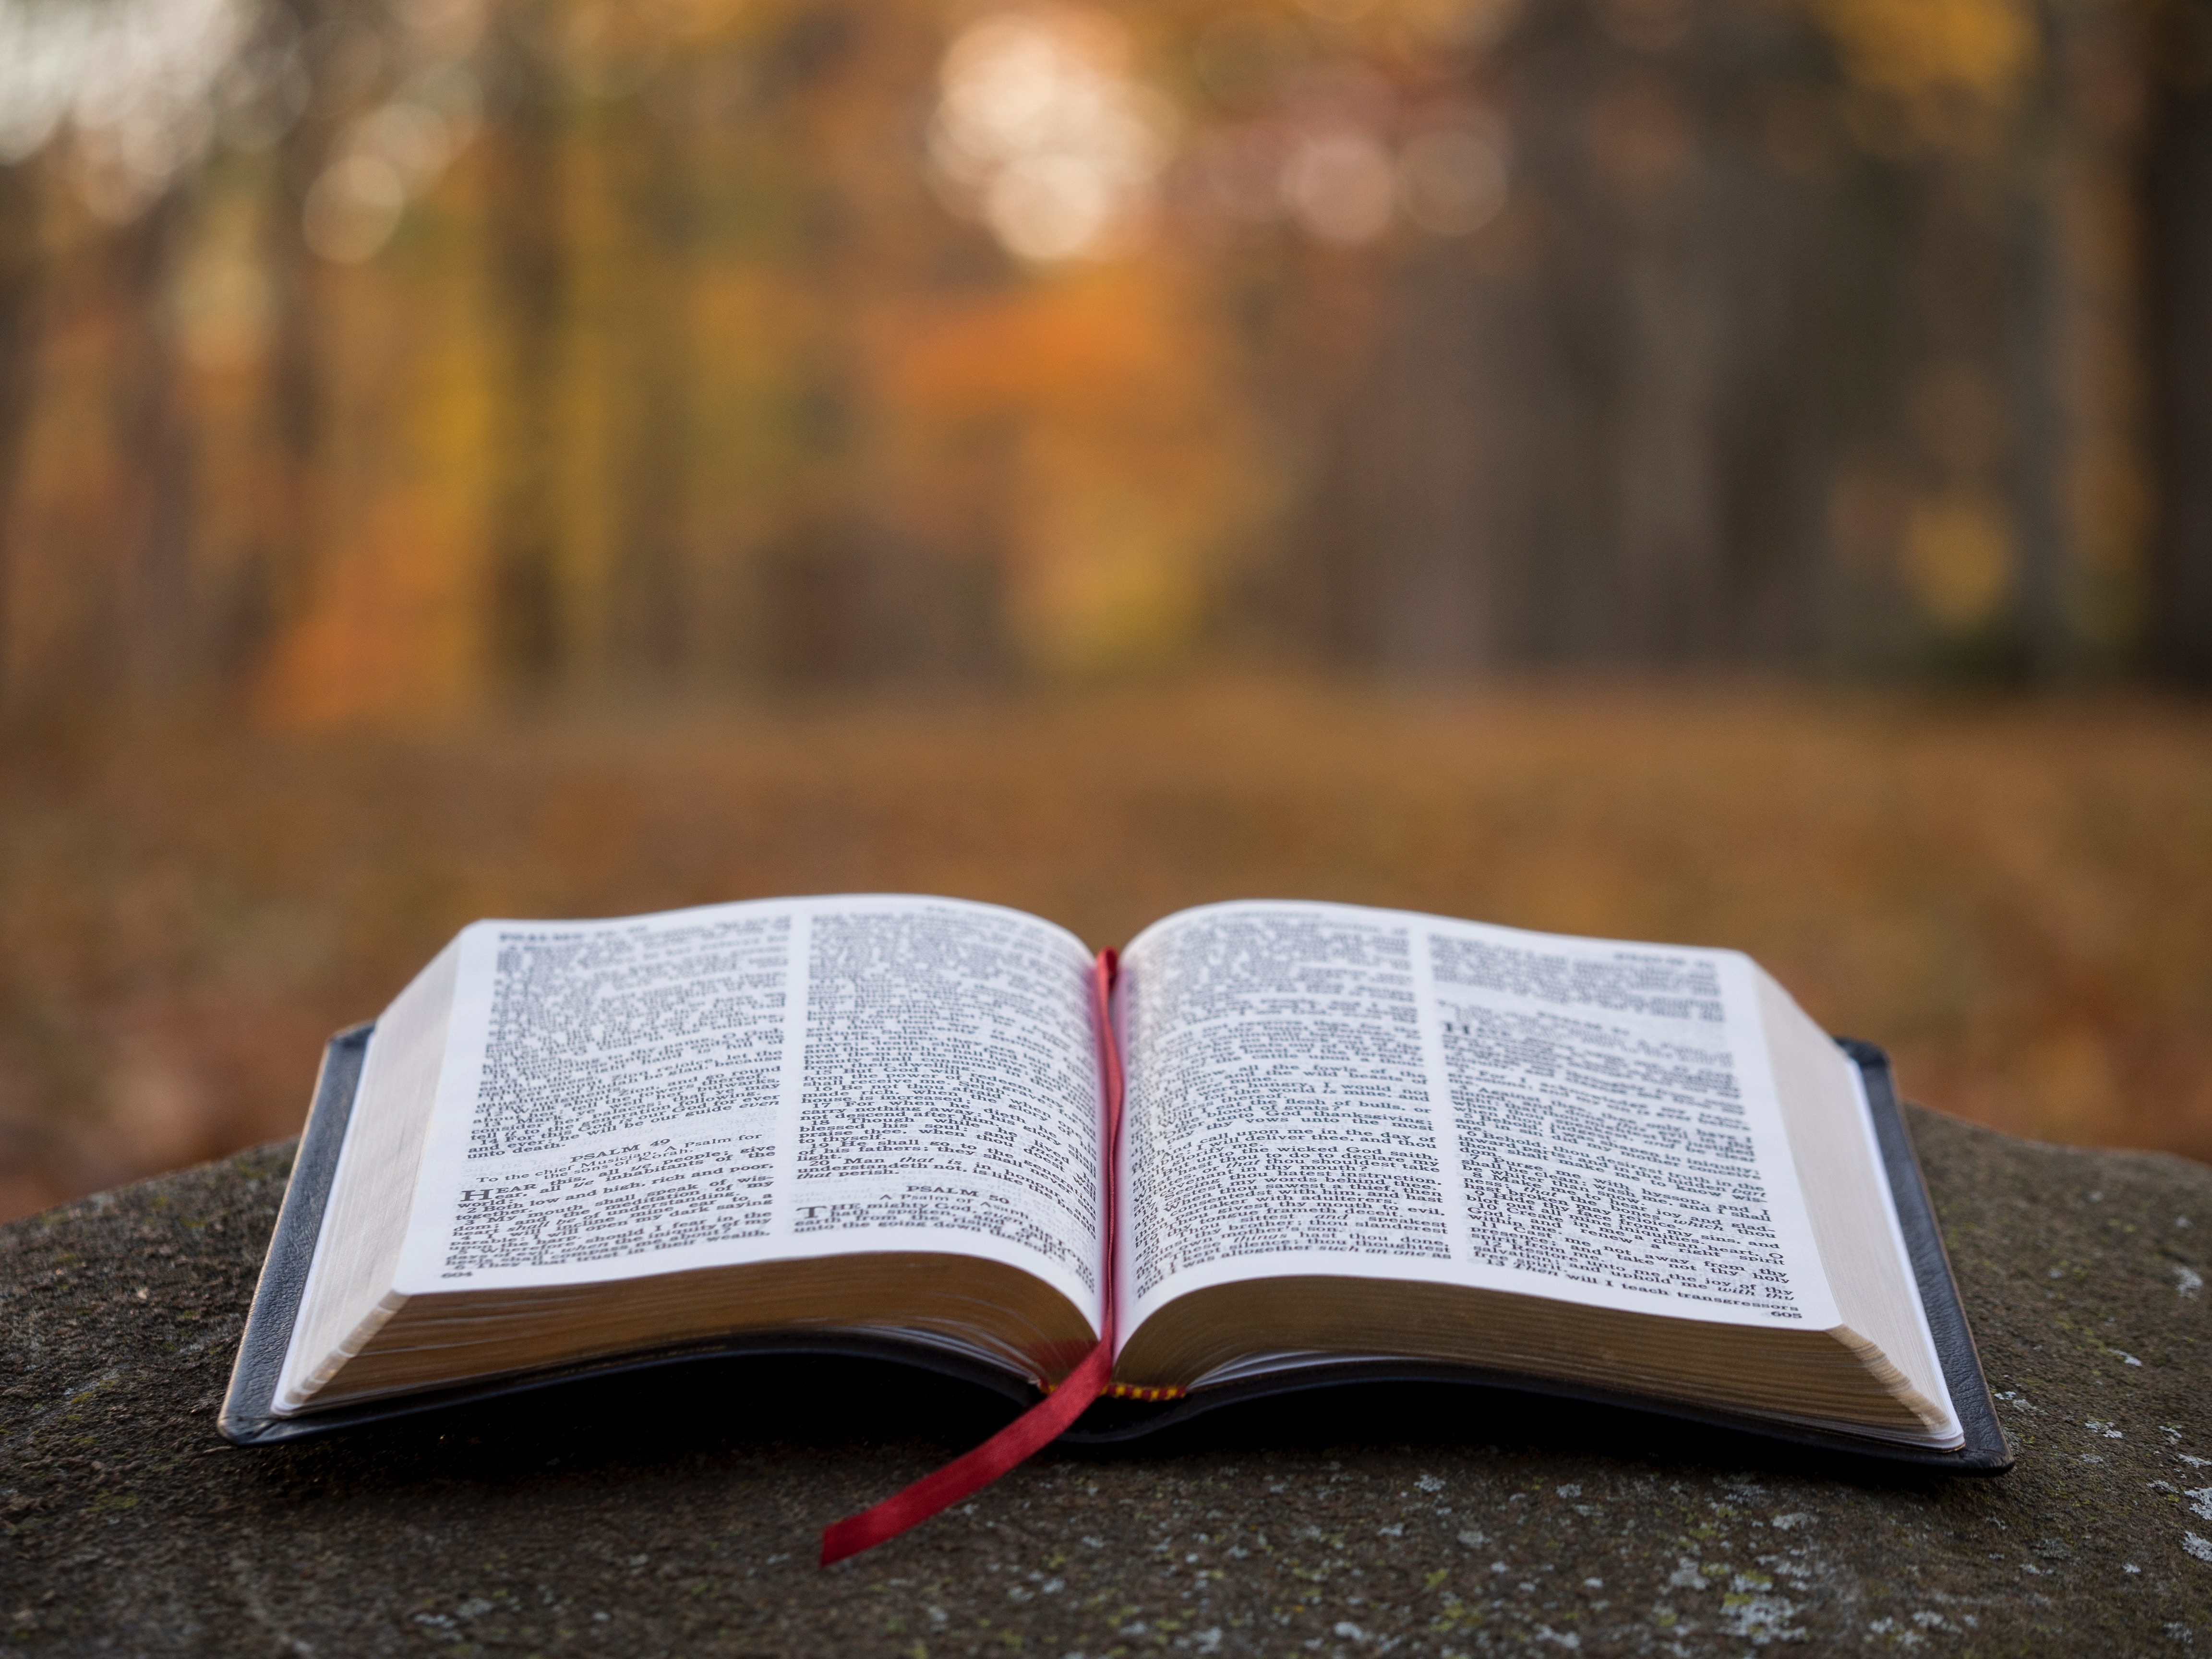 4608x3456 morning, holy word, book, bible, truth, the life, life, red, god, fall, depth of field, orange, reading, gods word, rock, morning prayer, open bible, holy, stone, Creative Commons image, autumn